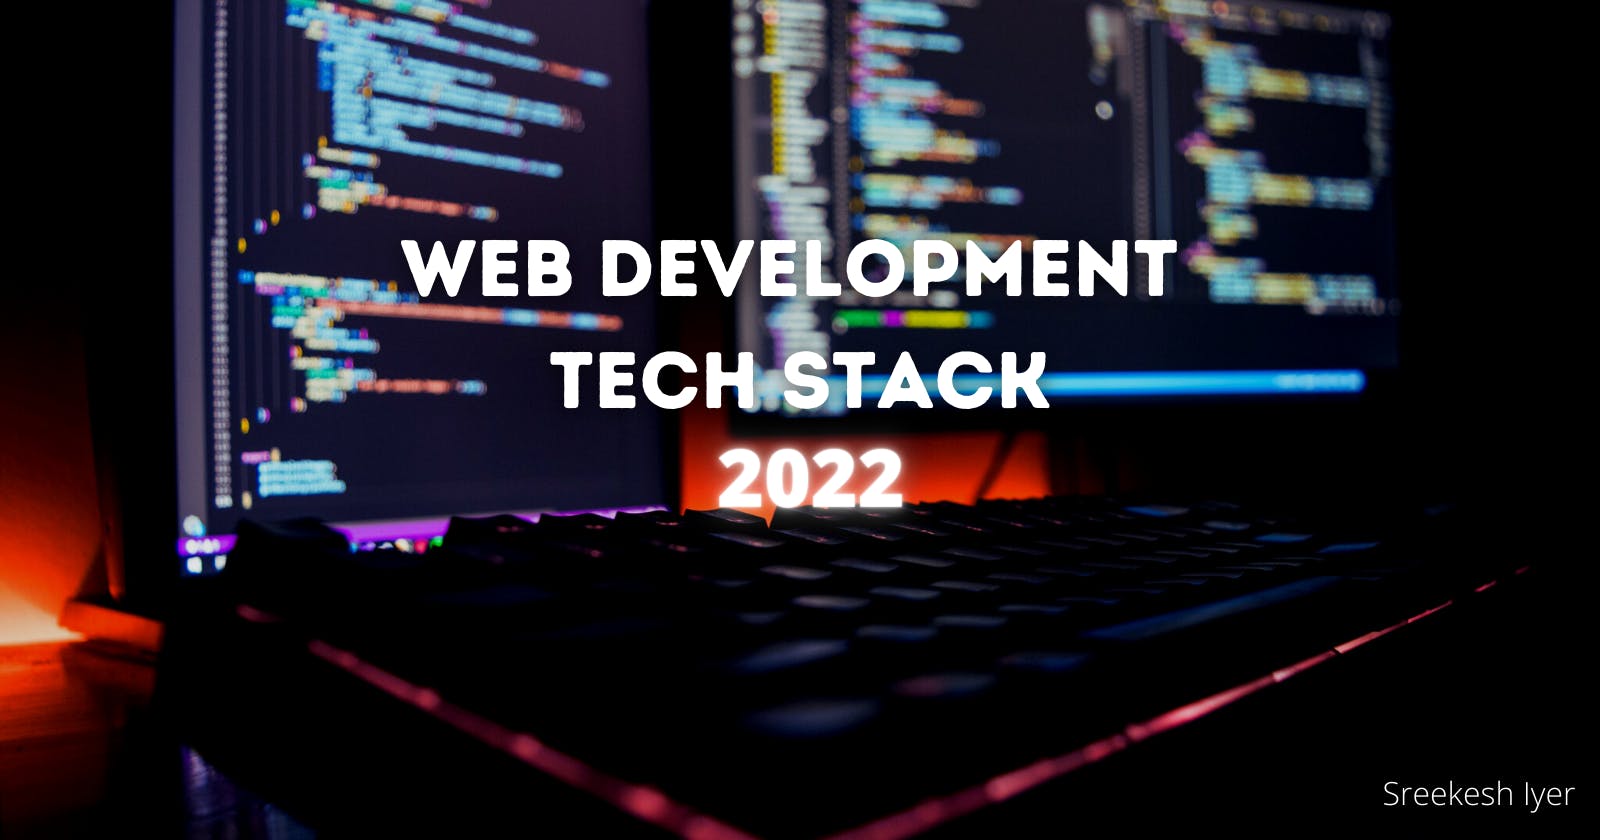 My Web Development Tech Stack for 2022